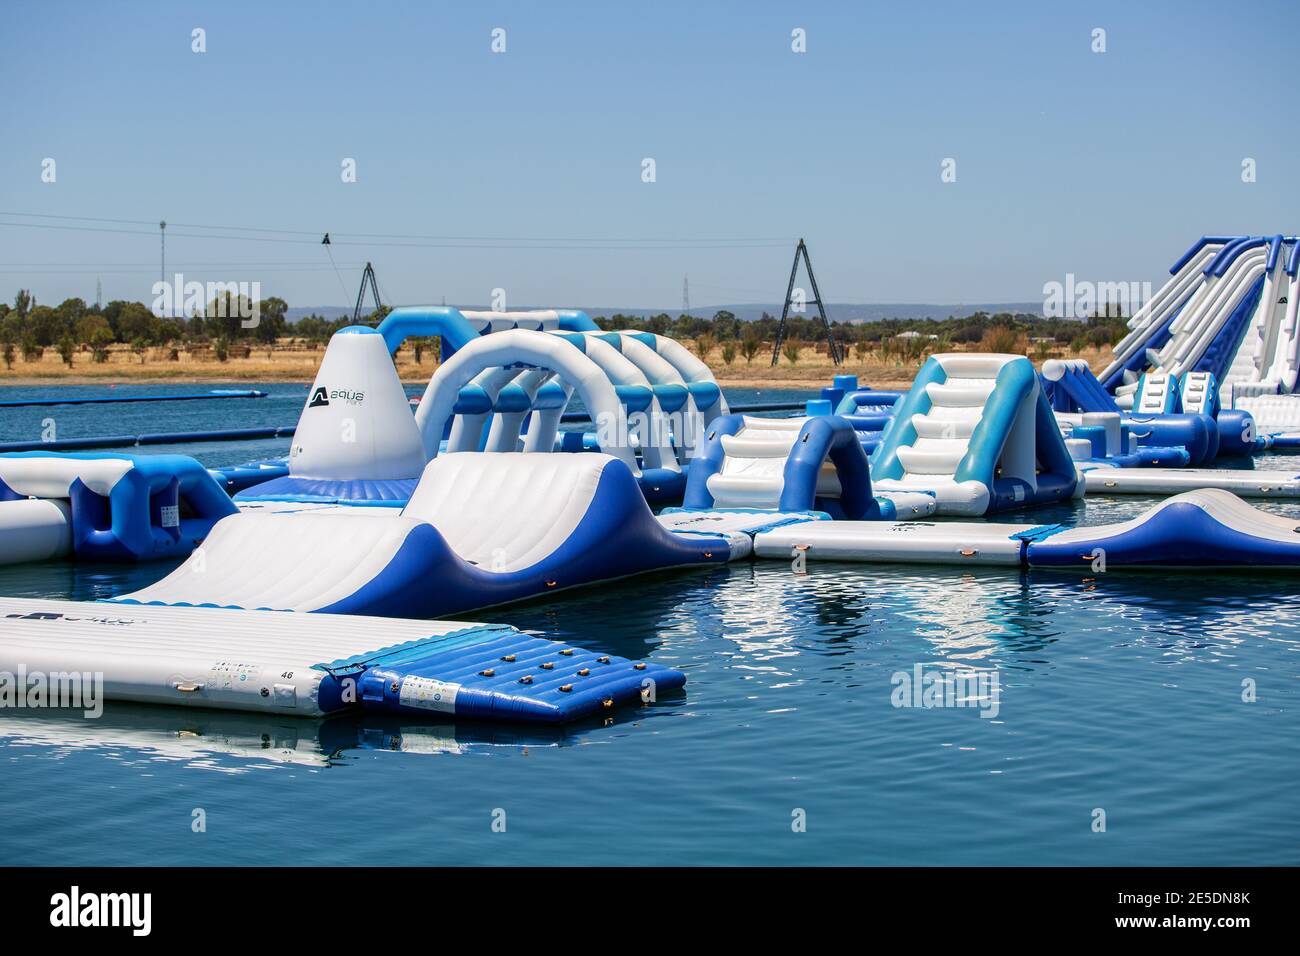 Perth, Australia - January 22nd 2021: Perth Aqua Park, a huge floating inflatable fun park with over 100 interconnected obstacles Stock Photo